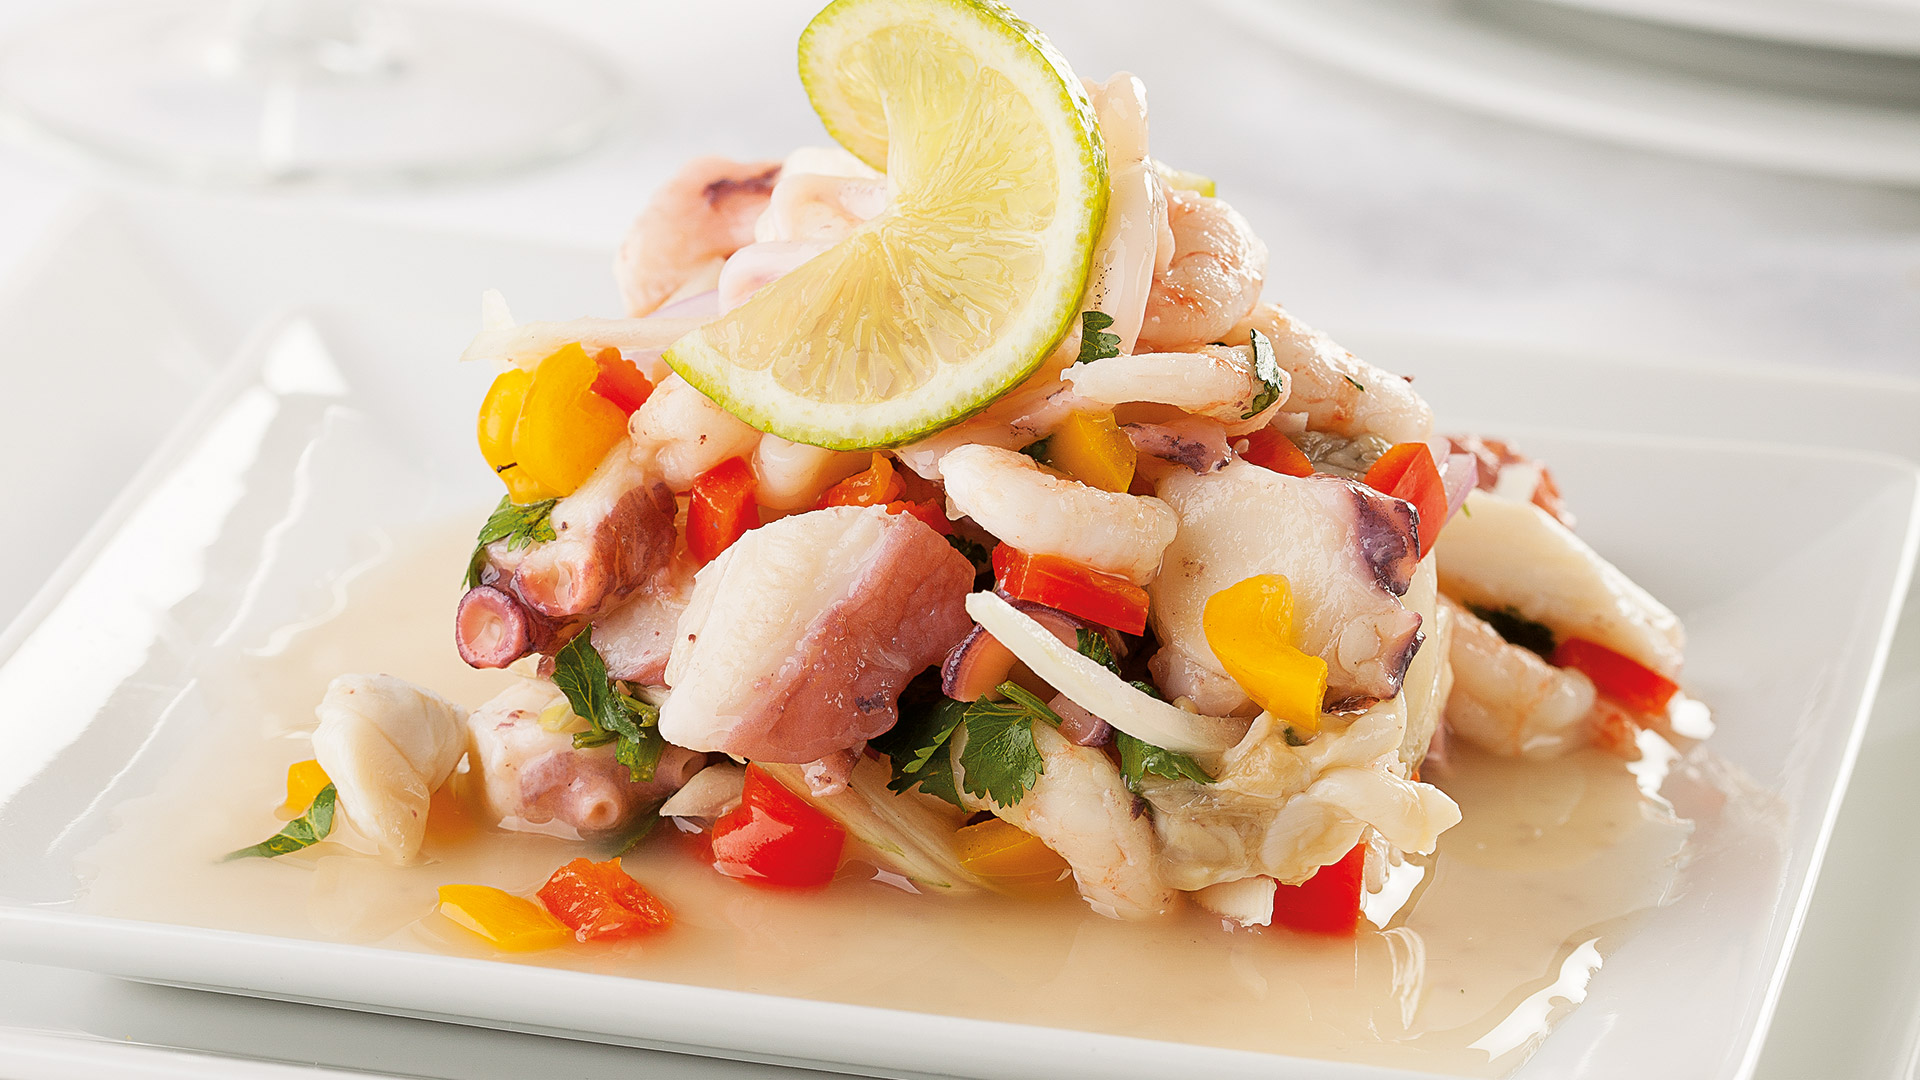 Tips To Make A Ceviche Even The Pickiest Peruvian Would Love